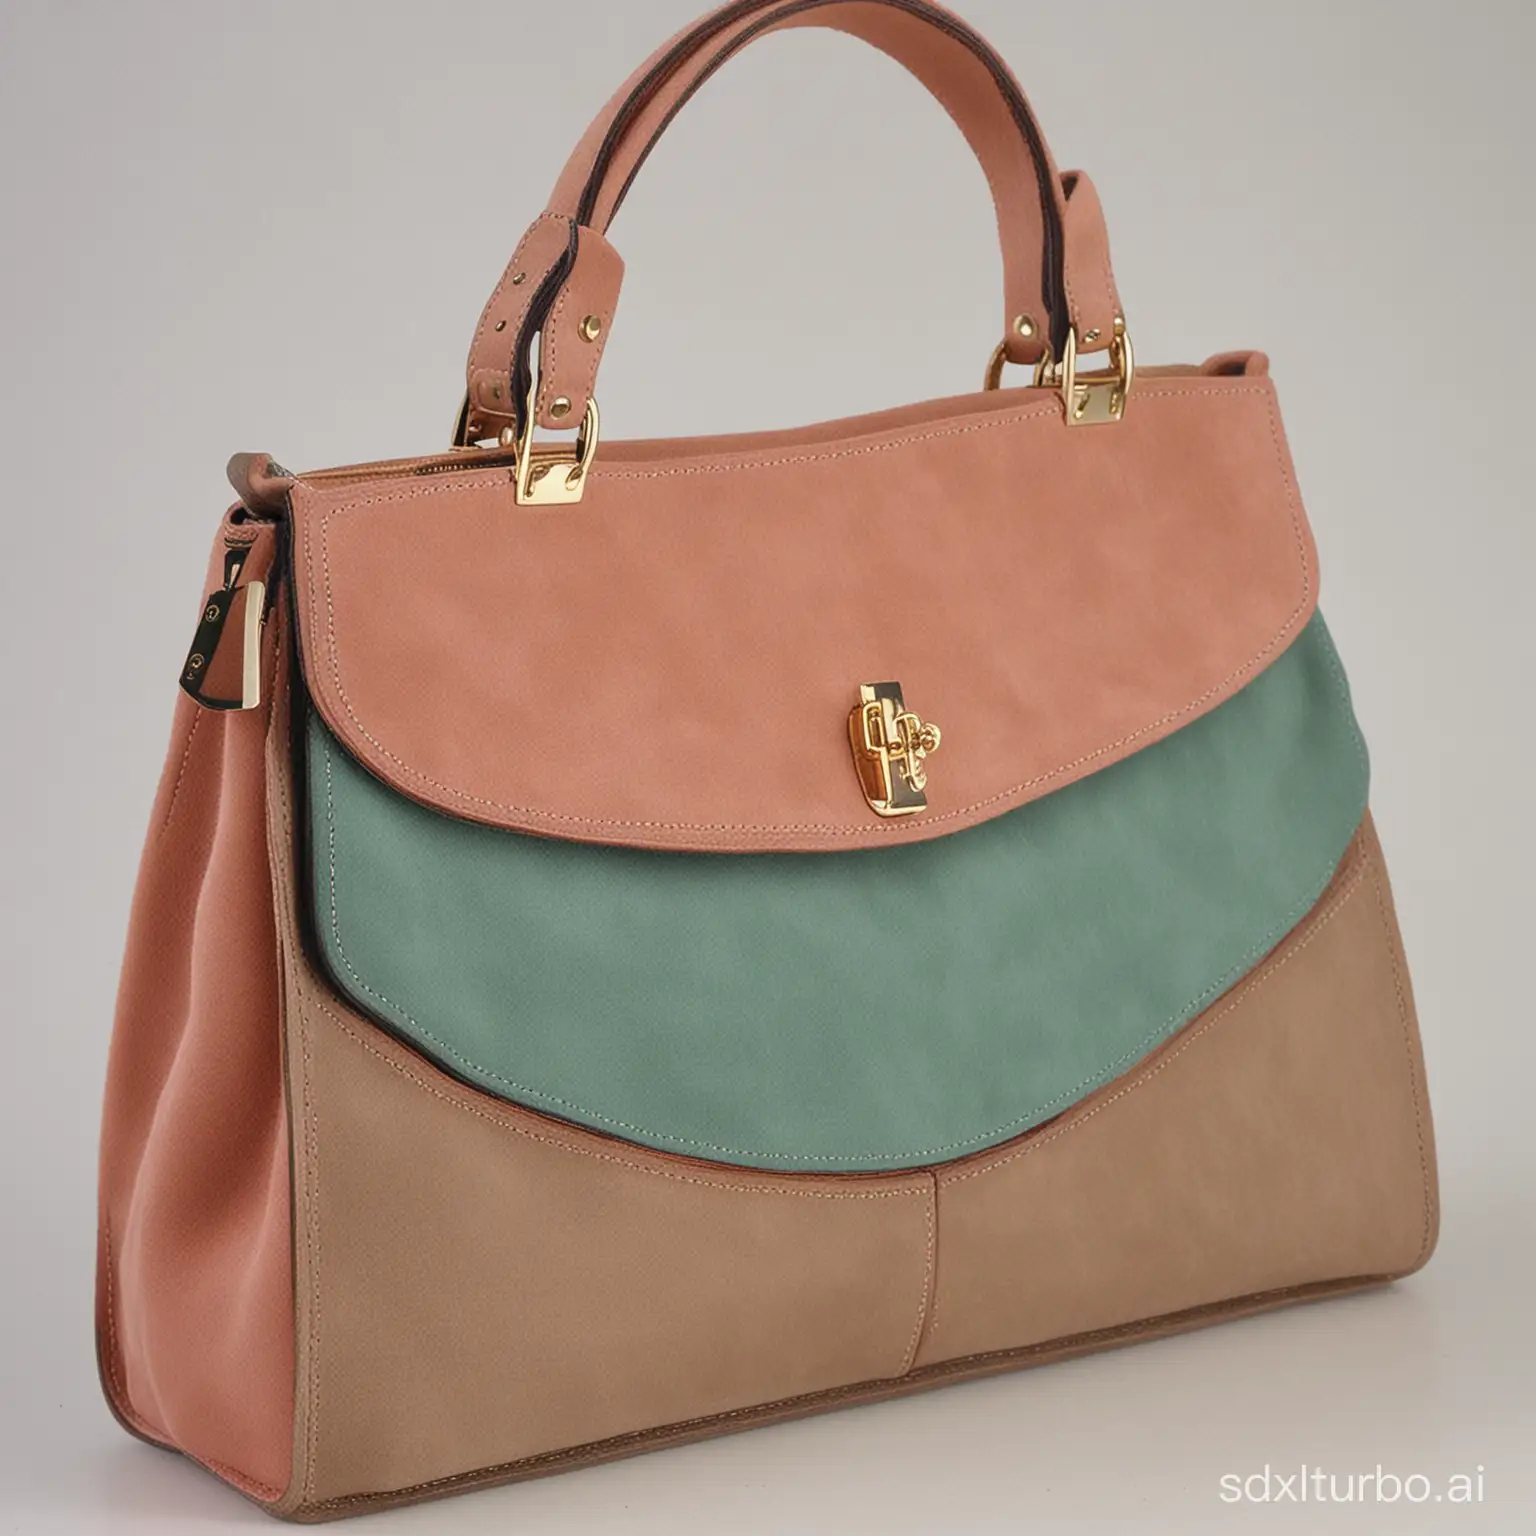 Make a fashionable designer purse with color combination suede leather